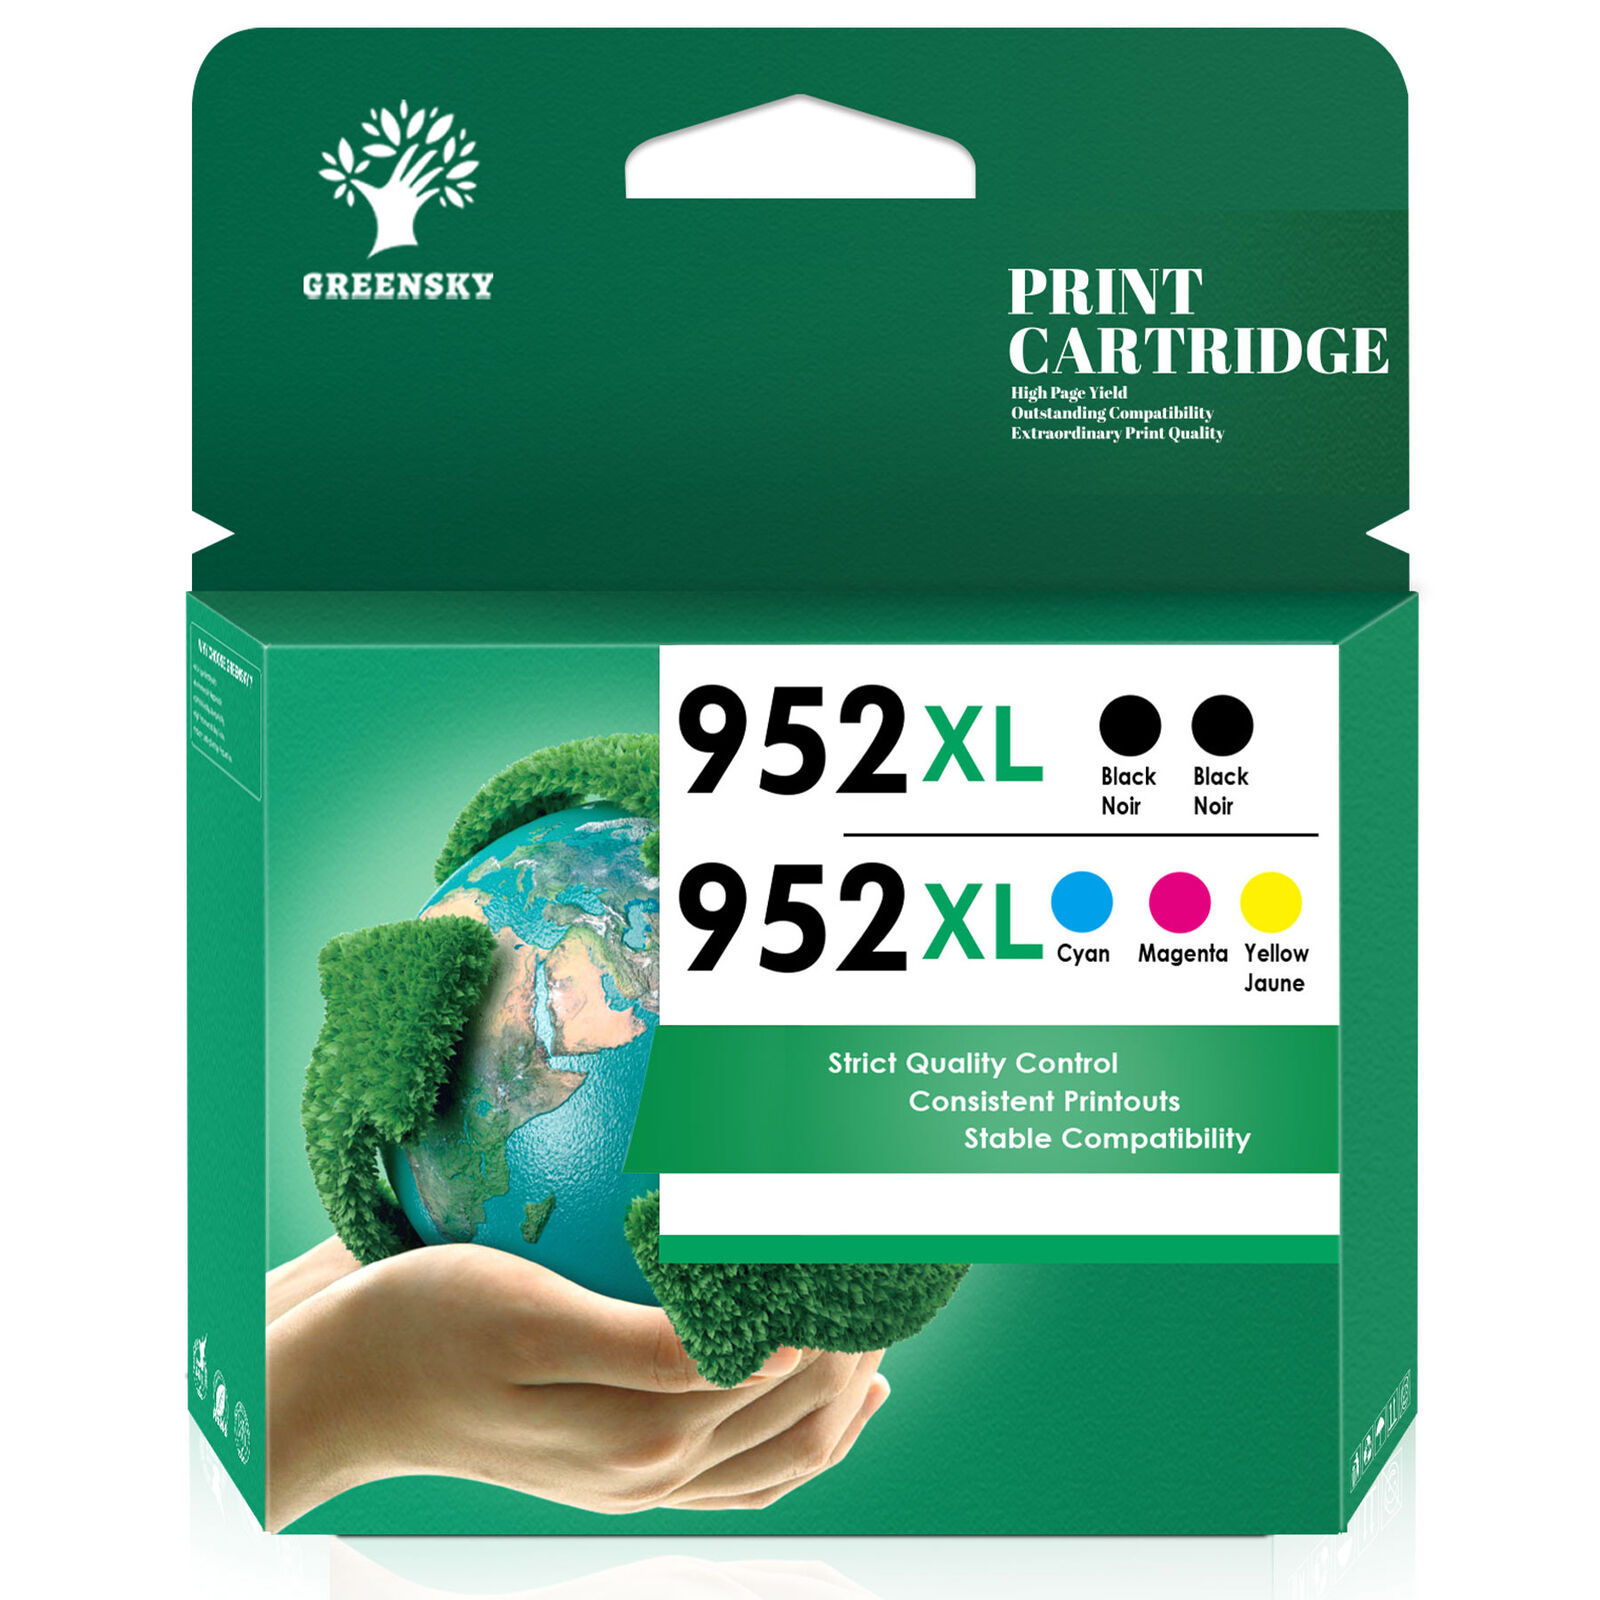 5Pack 952XL Ink Cartridge for HP 952 XL OfficeJet Pro 7720 7740 8216 8702 8710